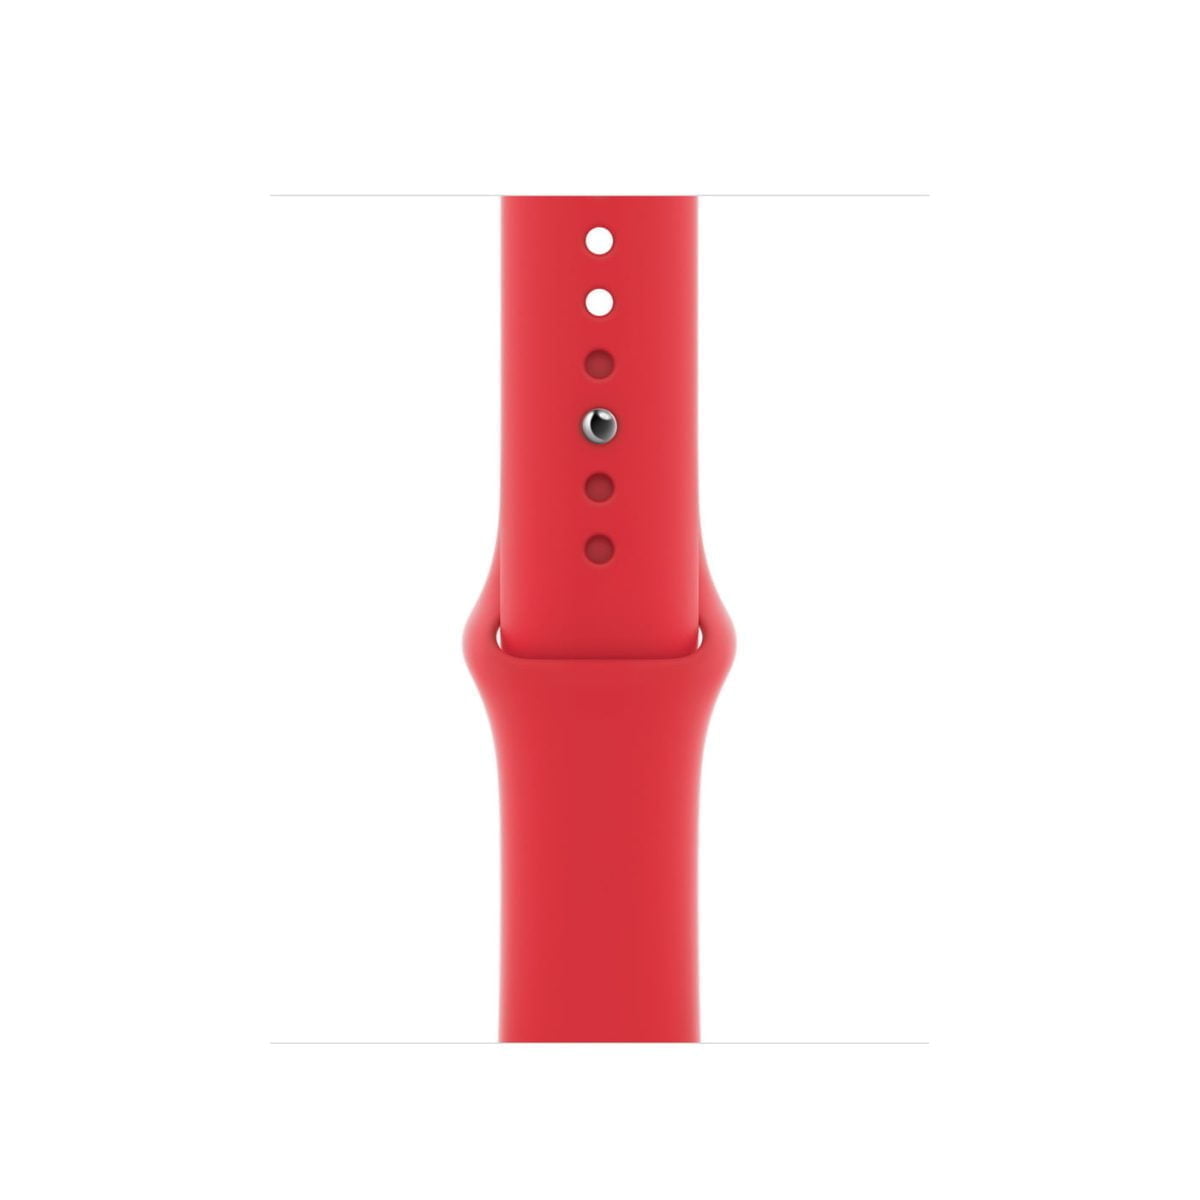 Myar2 Apple &Lt;Div Class=&Quot;Sku-Title&Quot;&Gt; &Lt;Div Class=&Quot;Sku-Title&Quot;&Gt; &Lt;H1 Class=&Quot;Heading-5 V-Fw-Regular&Quot;&Gt;Apple Watch Series 6 (Gps) 40Mm Red Aluminum Case With Red Sport Band - (Product)Red&Lt;/H1&Gt; &Lt;/Div&Gt; &Lt;/Div&Gt; &Lt;Div Class=&Quot;Long-Description-Container Body-Copy &Quot;&Gt; &Lt;Div Class=&Quot;Product-Description&Quot;&Gt; &Lt;Div Class=&Quot;Product-Description&Quot;&Gt;Apple Watch Series 6 Lets You Measure Your Blood Oxygen Level With A Revolutionary New Sensor And App.¹ Take An Ecg From Your Wrist.² See Your Fitness Metrics On The Enhanced Always-On Retina Display, Now 2.5X Brighter Outdoors When Your Wrist Is Down. Set A Bedtime Routine And Track Your Sleep. And Reply To Calls And Messages Right From Your Wrist. It’s The Ultimate Device For A Healthier, More Active, More Connected Life.&Lt;/Div&Gt; &Lt;Div&Gt; &Lt;Div Class=&Quot;As-Productdecision-Productdescriptions&Quot;&Gt; The Aluminum Case Is Lightweight And Made From 100 Percent Recycled Aerospace-Grade Alloy. The Sport Band Is Made From A Durable Yet Surprisingly Soft High-Performance Fluoroelastomer, With An Innovative Pin-And-Tuck Closure. &Lt;/Div&Gt; &Lt;/Div&Gt; &Lt;/Div&Gt; &Lt;/Div&Gt; Apple Watch Apple Watch (Product)Red Aluminum Case With Red Sport Band 40Mm With Gps - M00A3